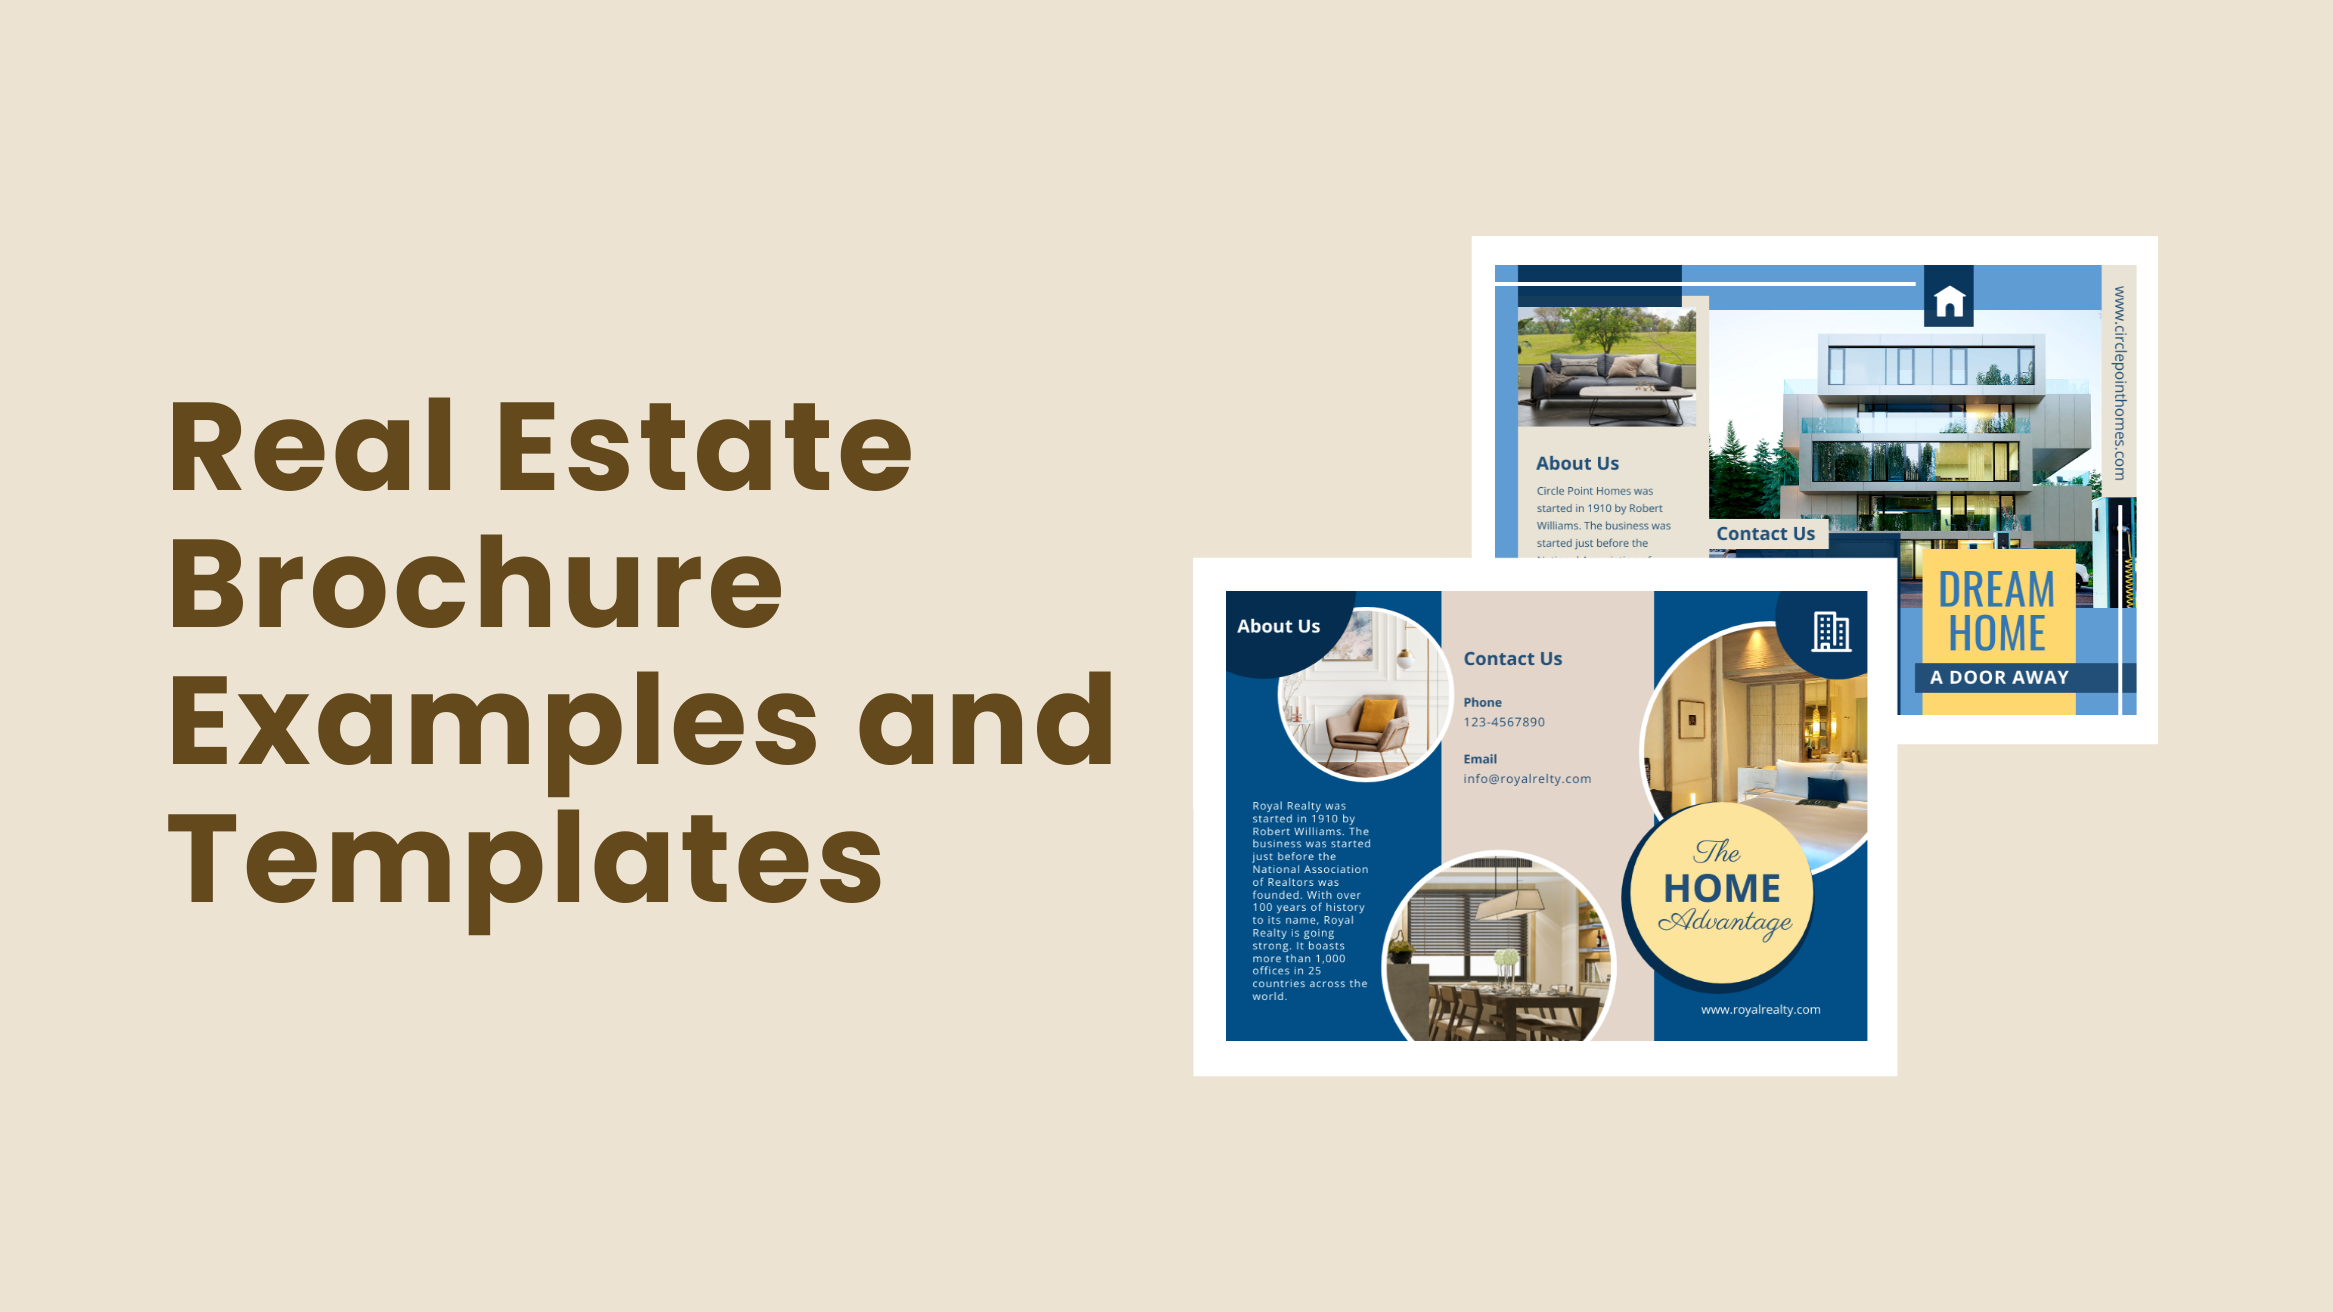 Real Estate Brochure Examples and Templates